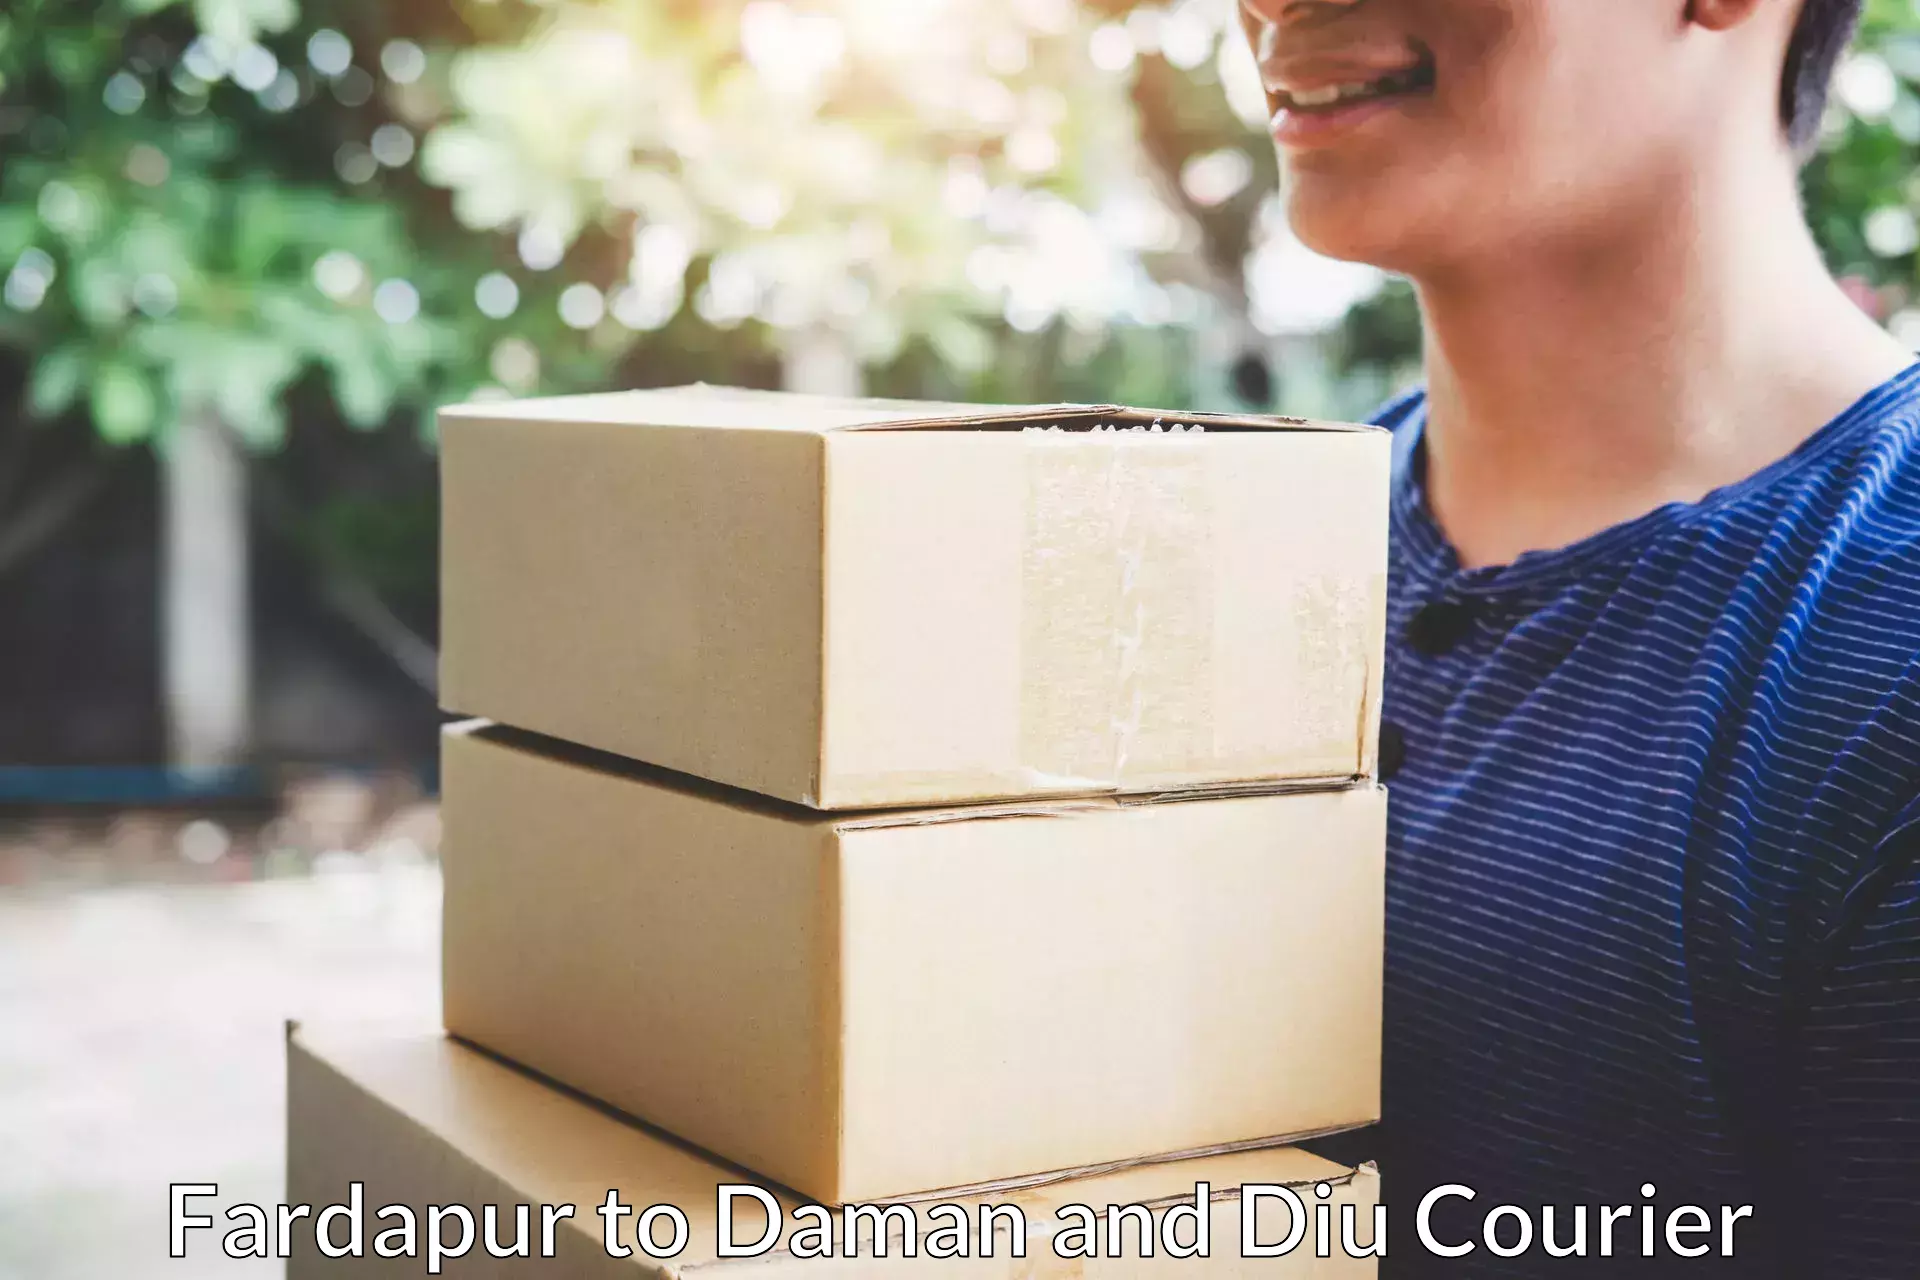 Residential moving experts Fardapur to Daman